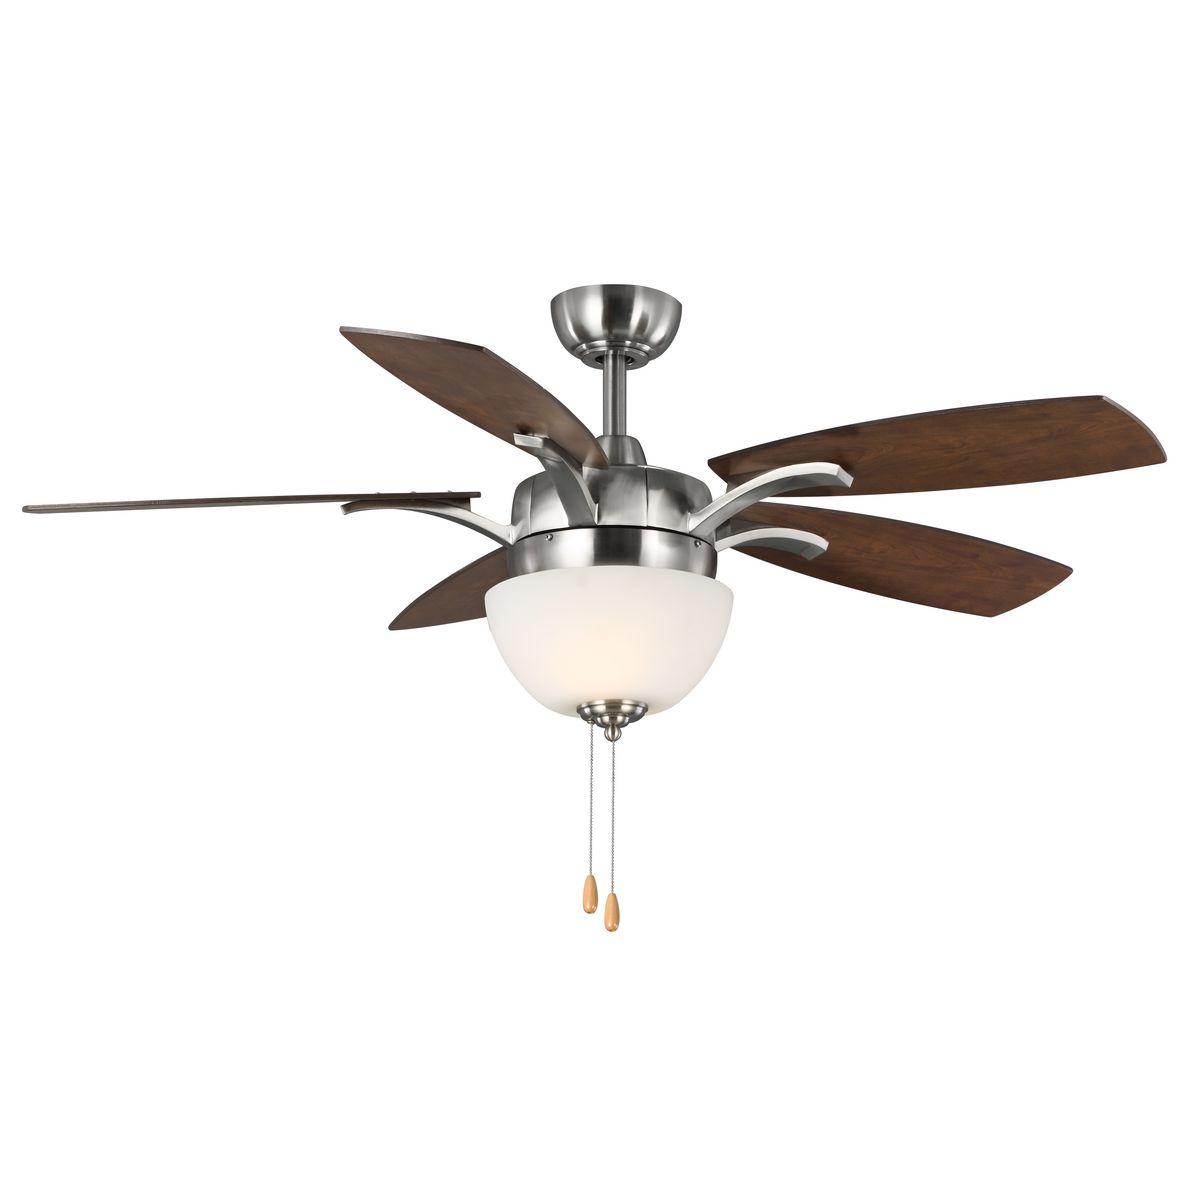 Hubbell P2598-09 The 52 in Olson five-blade ceiling fan features a generously sized etched watermark glass shade and sweeping blades highlighted with metal accents. Two 9W LED lamps are JA8 compliant, offering both form and function with energy and cost-savings benefits. 